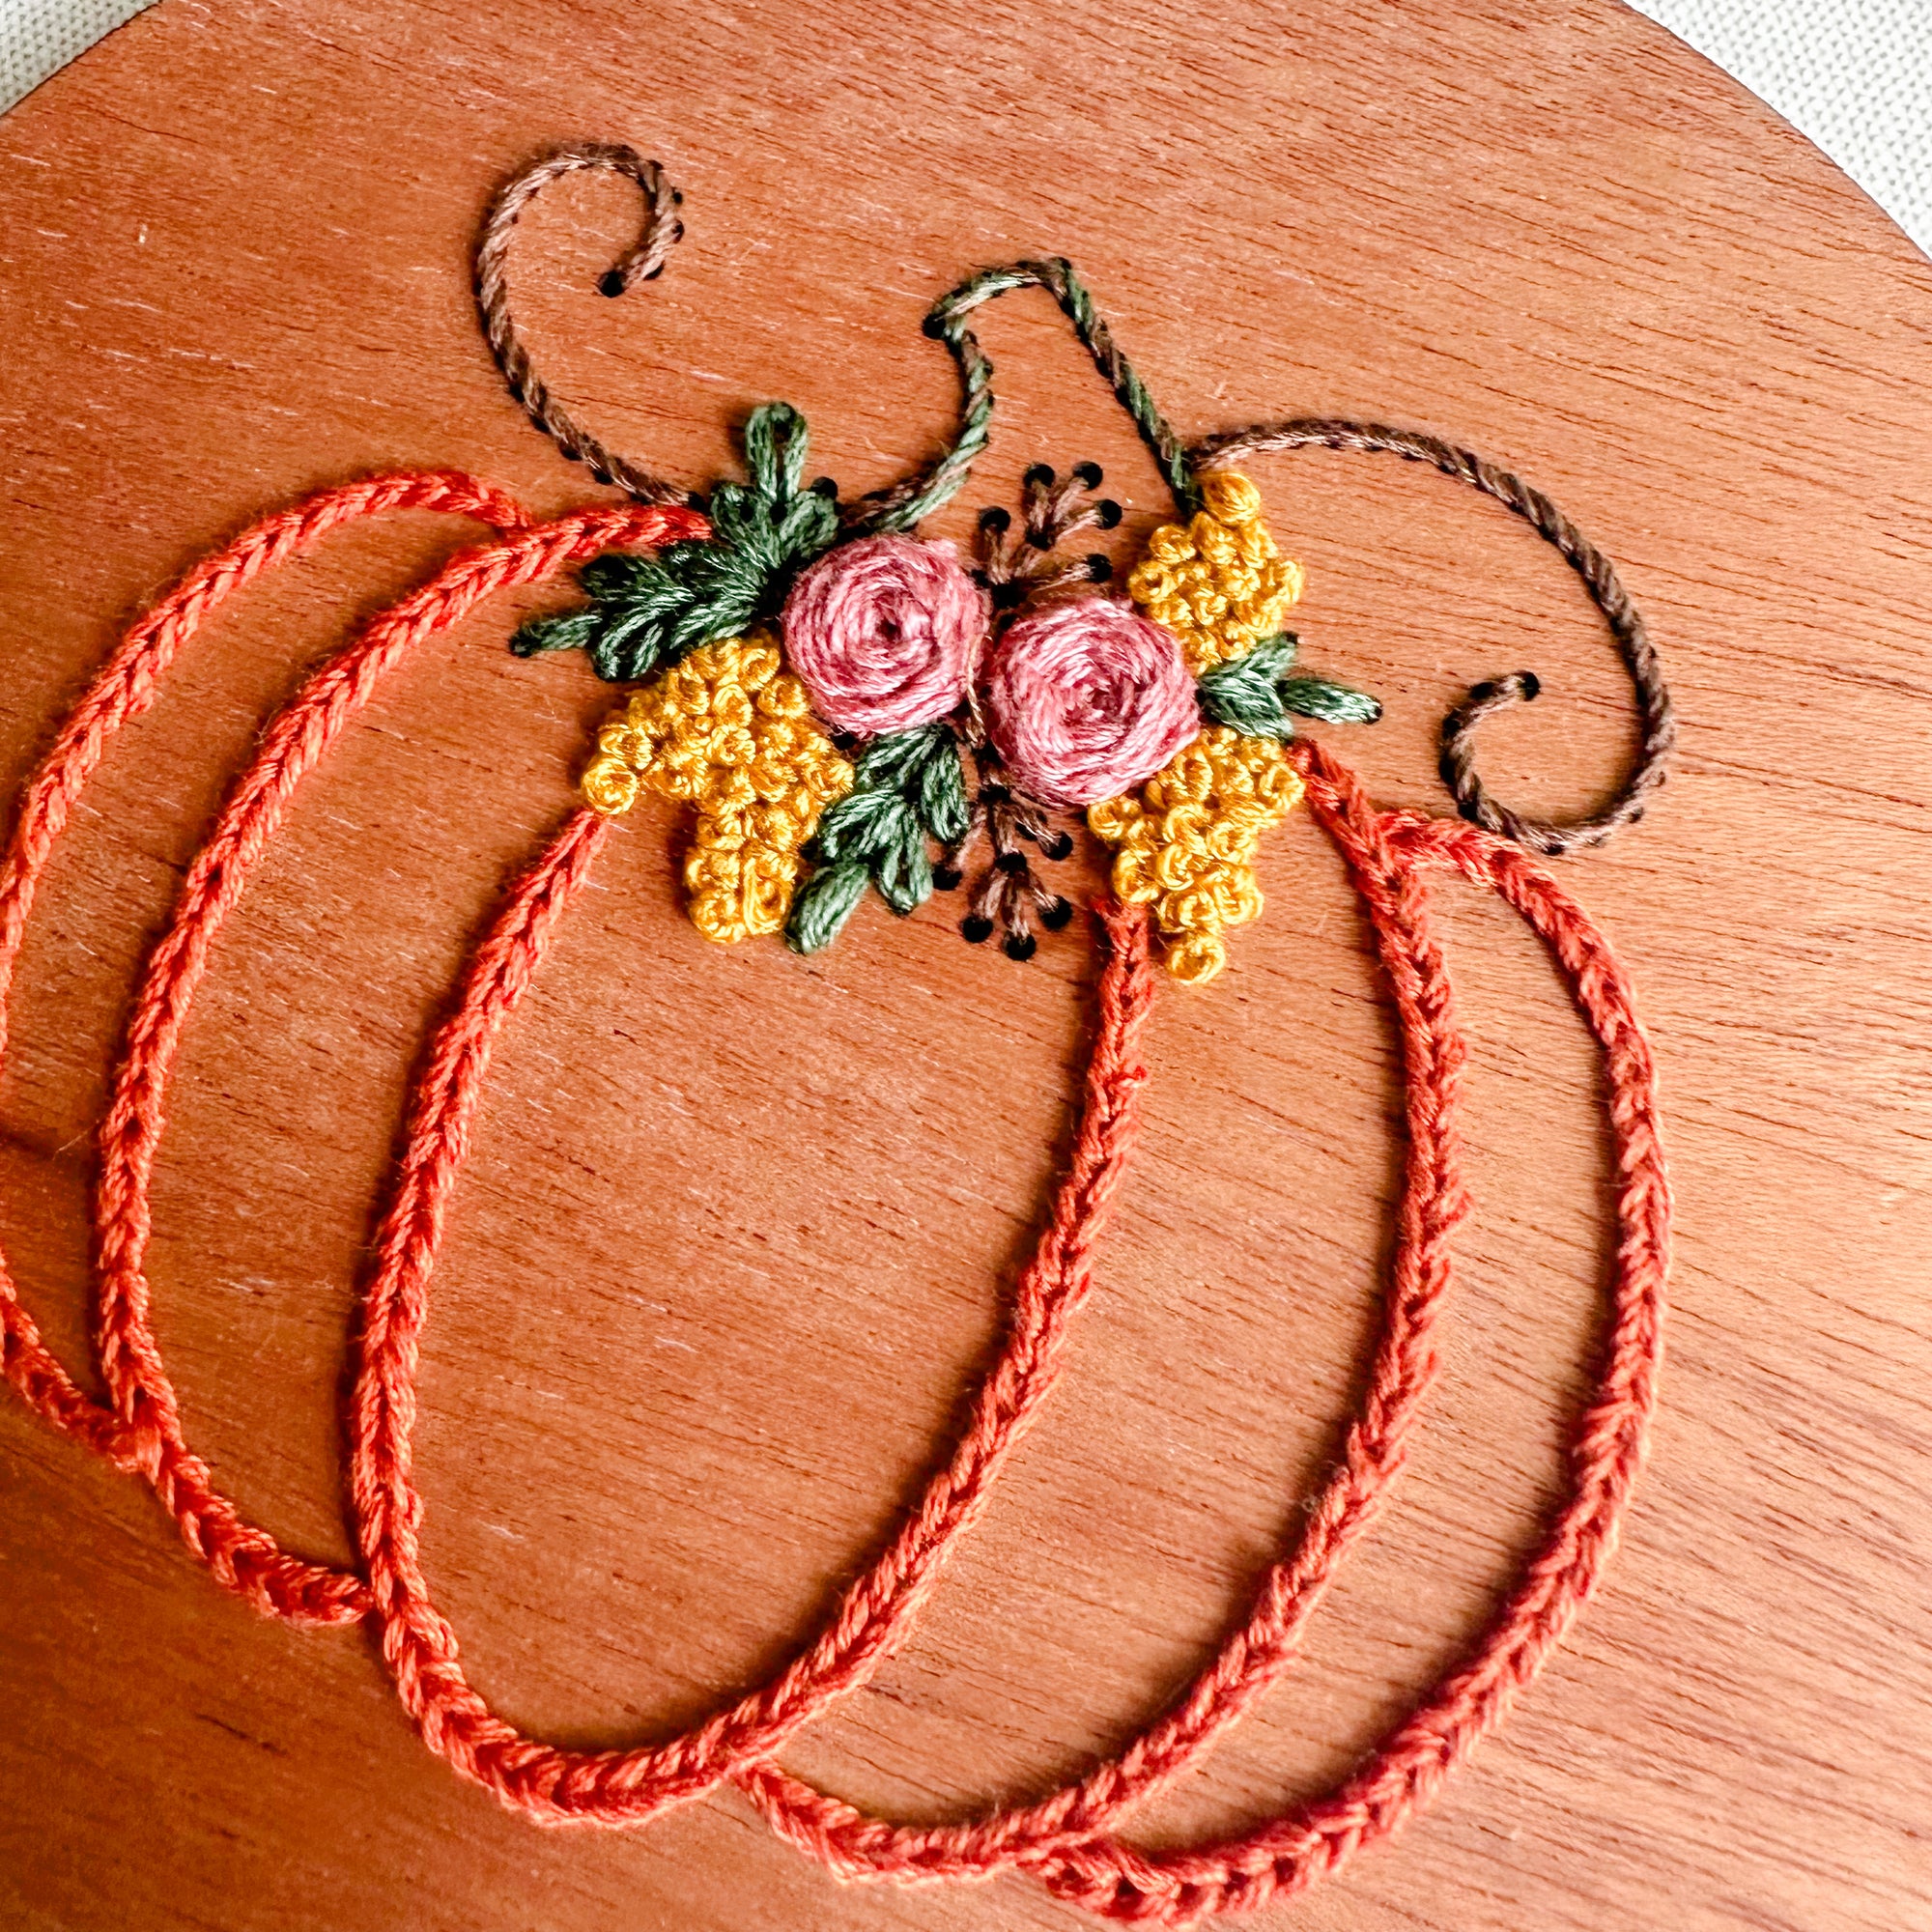 Spiced Pumpkin Embroidery Kit